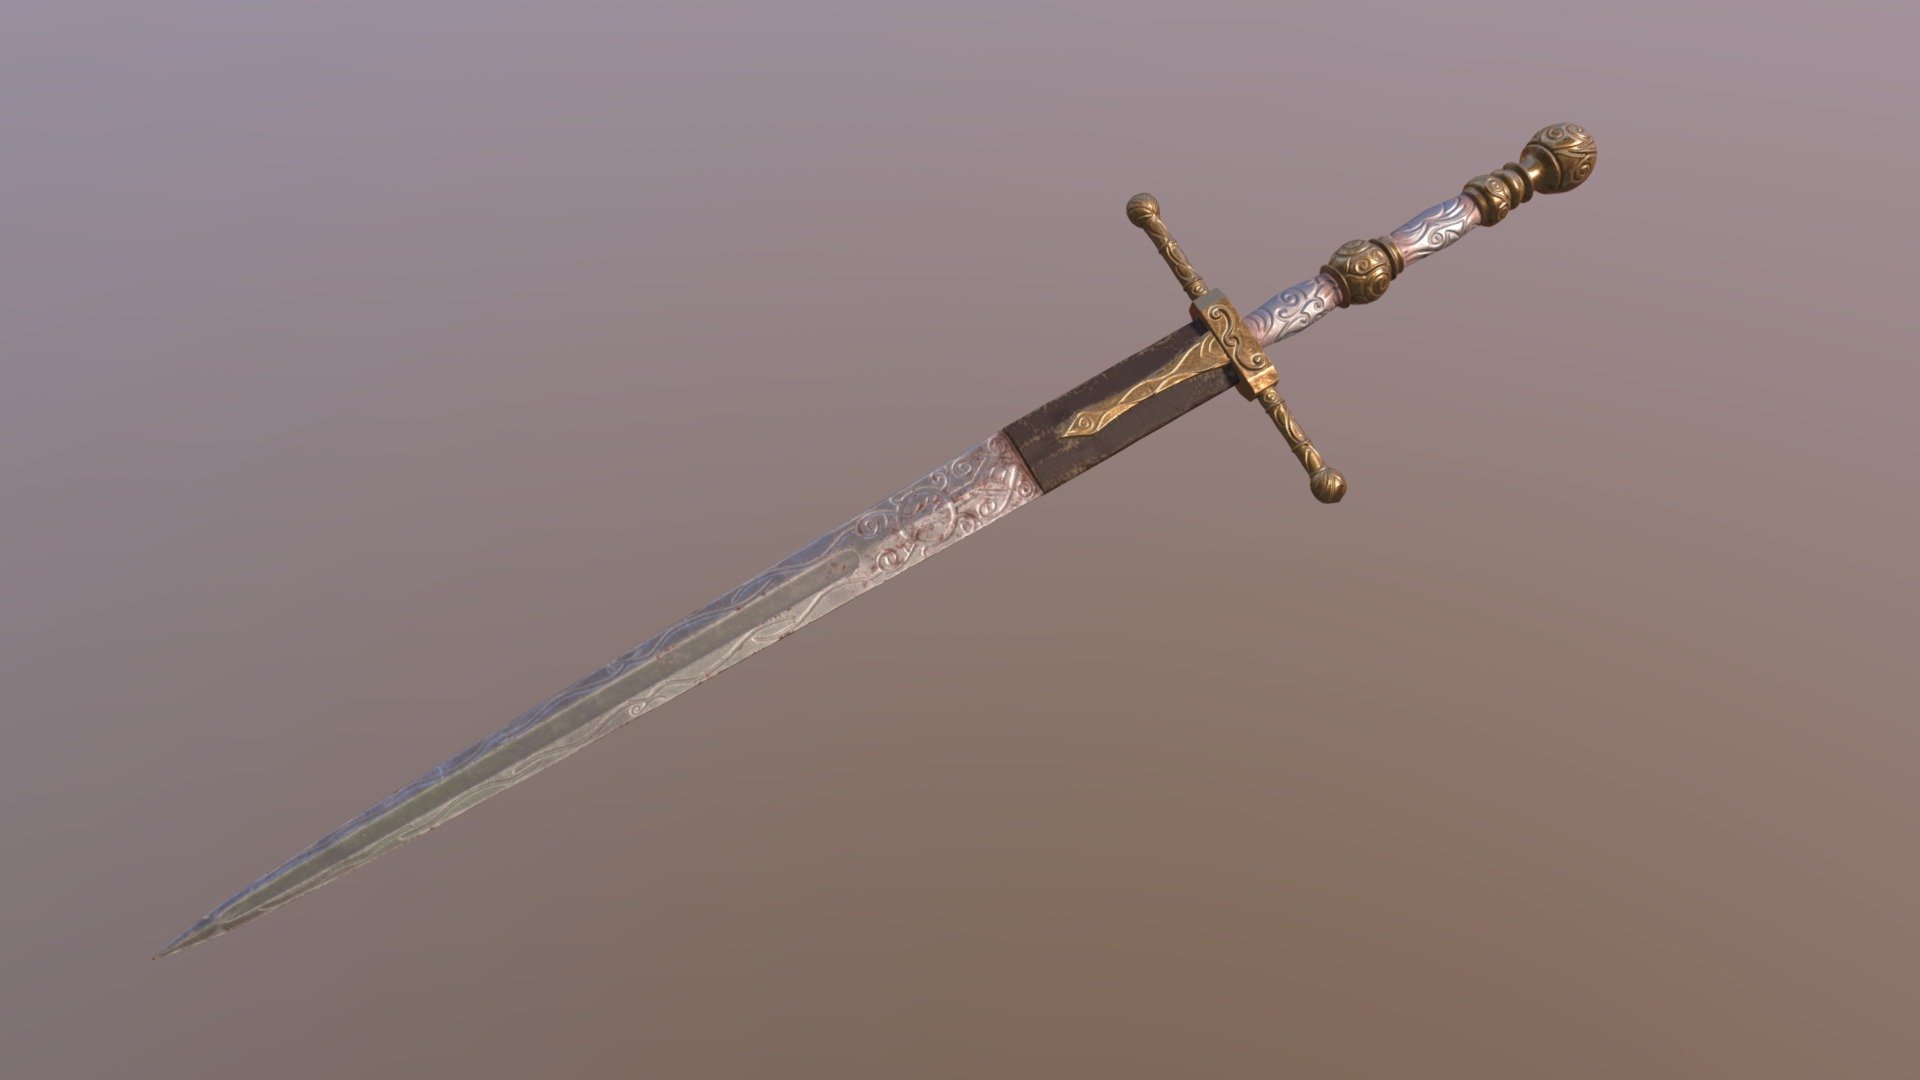 Well-crafted straight sword with an illustrious design, wielded by regulars of a lord's army. Though blackened and damaged by years of use, it appears to otherwise have been kept in serviceable condition, despite the soldiers having long since lost their minds.

Low Poly/Mid Poly Great Sword from my favourite game in this year - Elden Ring. Modeled, sculpted, remeshed and unwrapped in blender. Textured in Substance Painter. Like, follow and check more on my https://www.artstation.com/burning_umbrella
And GIT GUD! - Lordsworn`s Greatsword from Elden Ring - Download Free 3D model by burning_umbrella (@burningumbrella69) 3d model